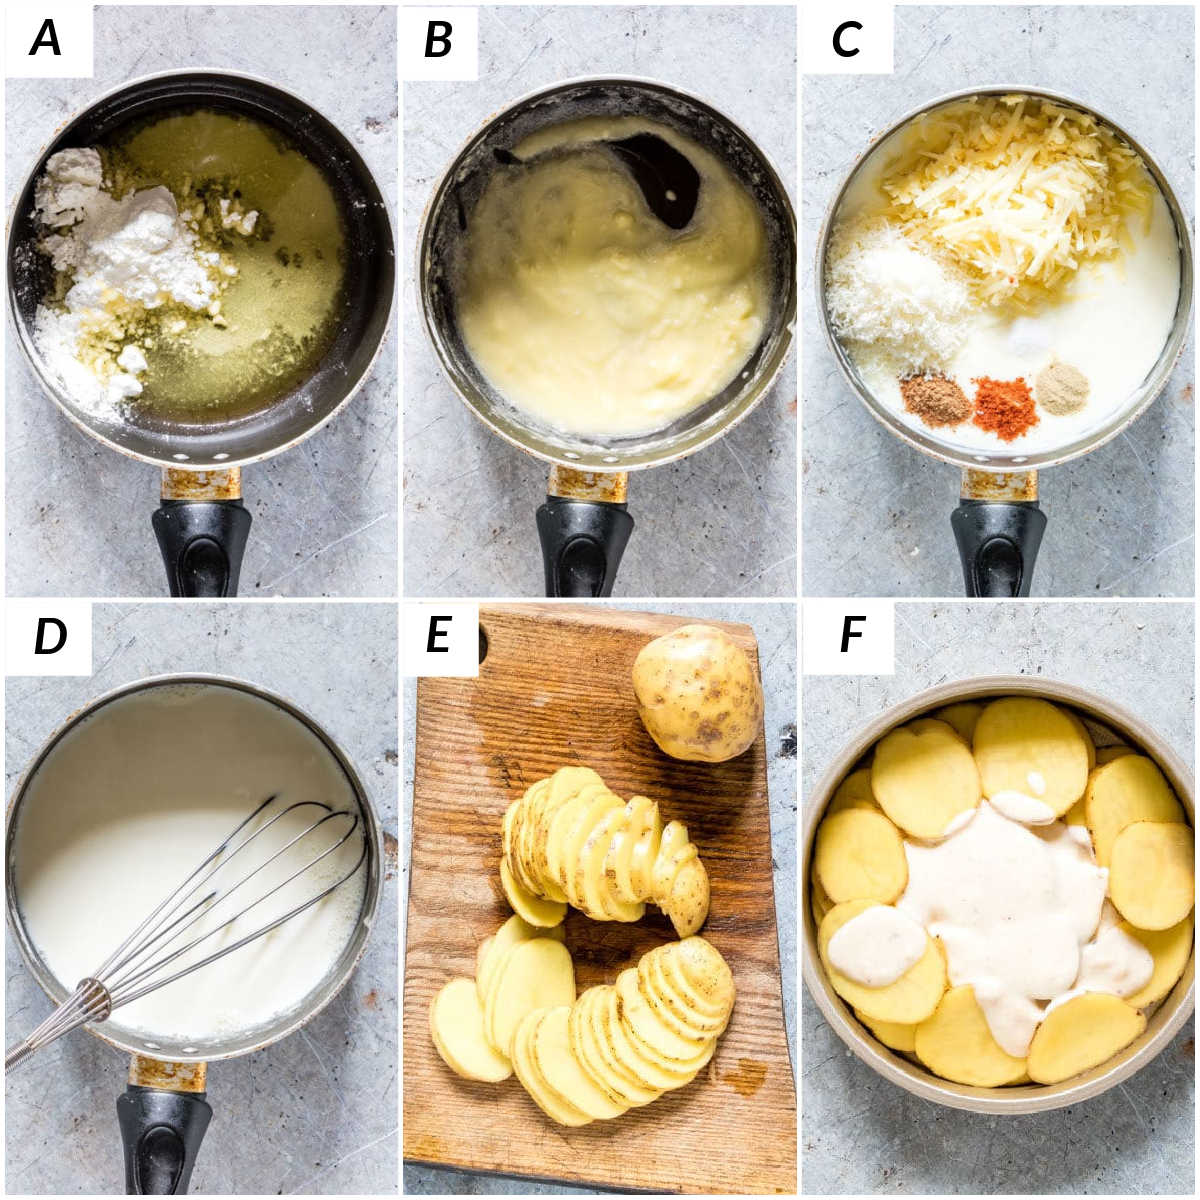 image collage showing the first batch of steps for making instant pot scalloped potatoes